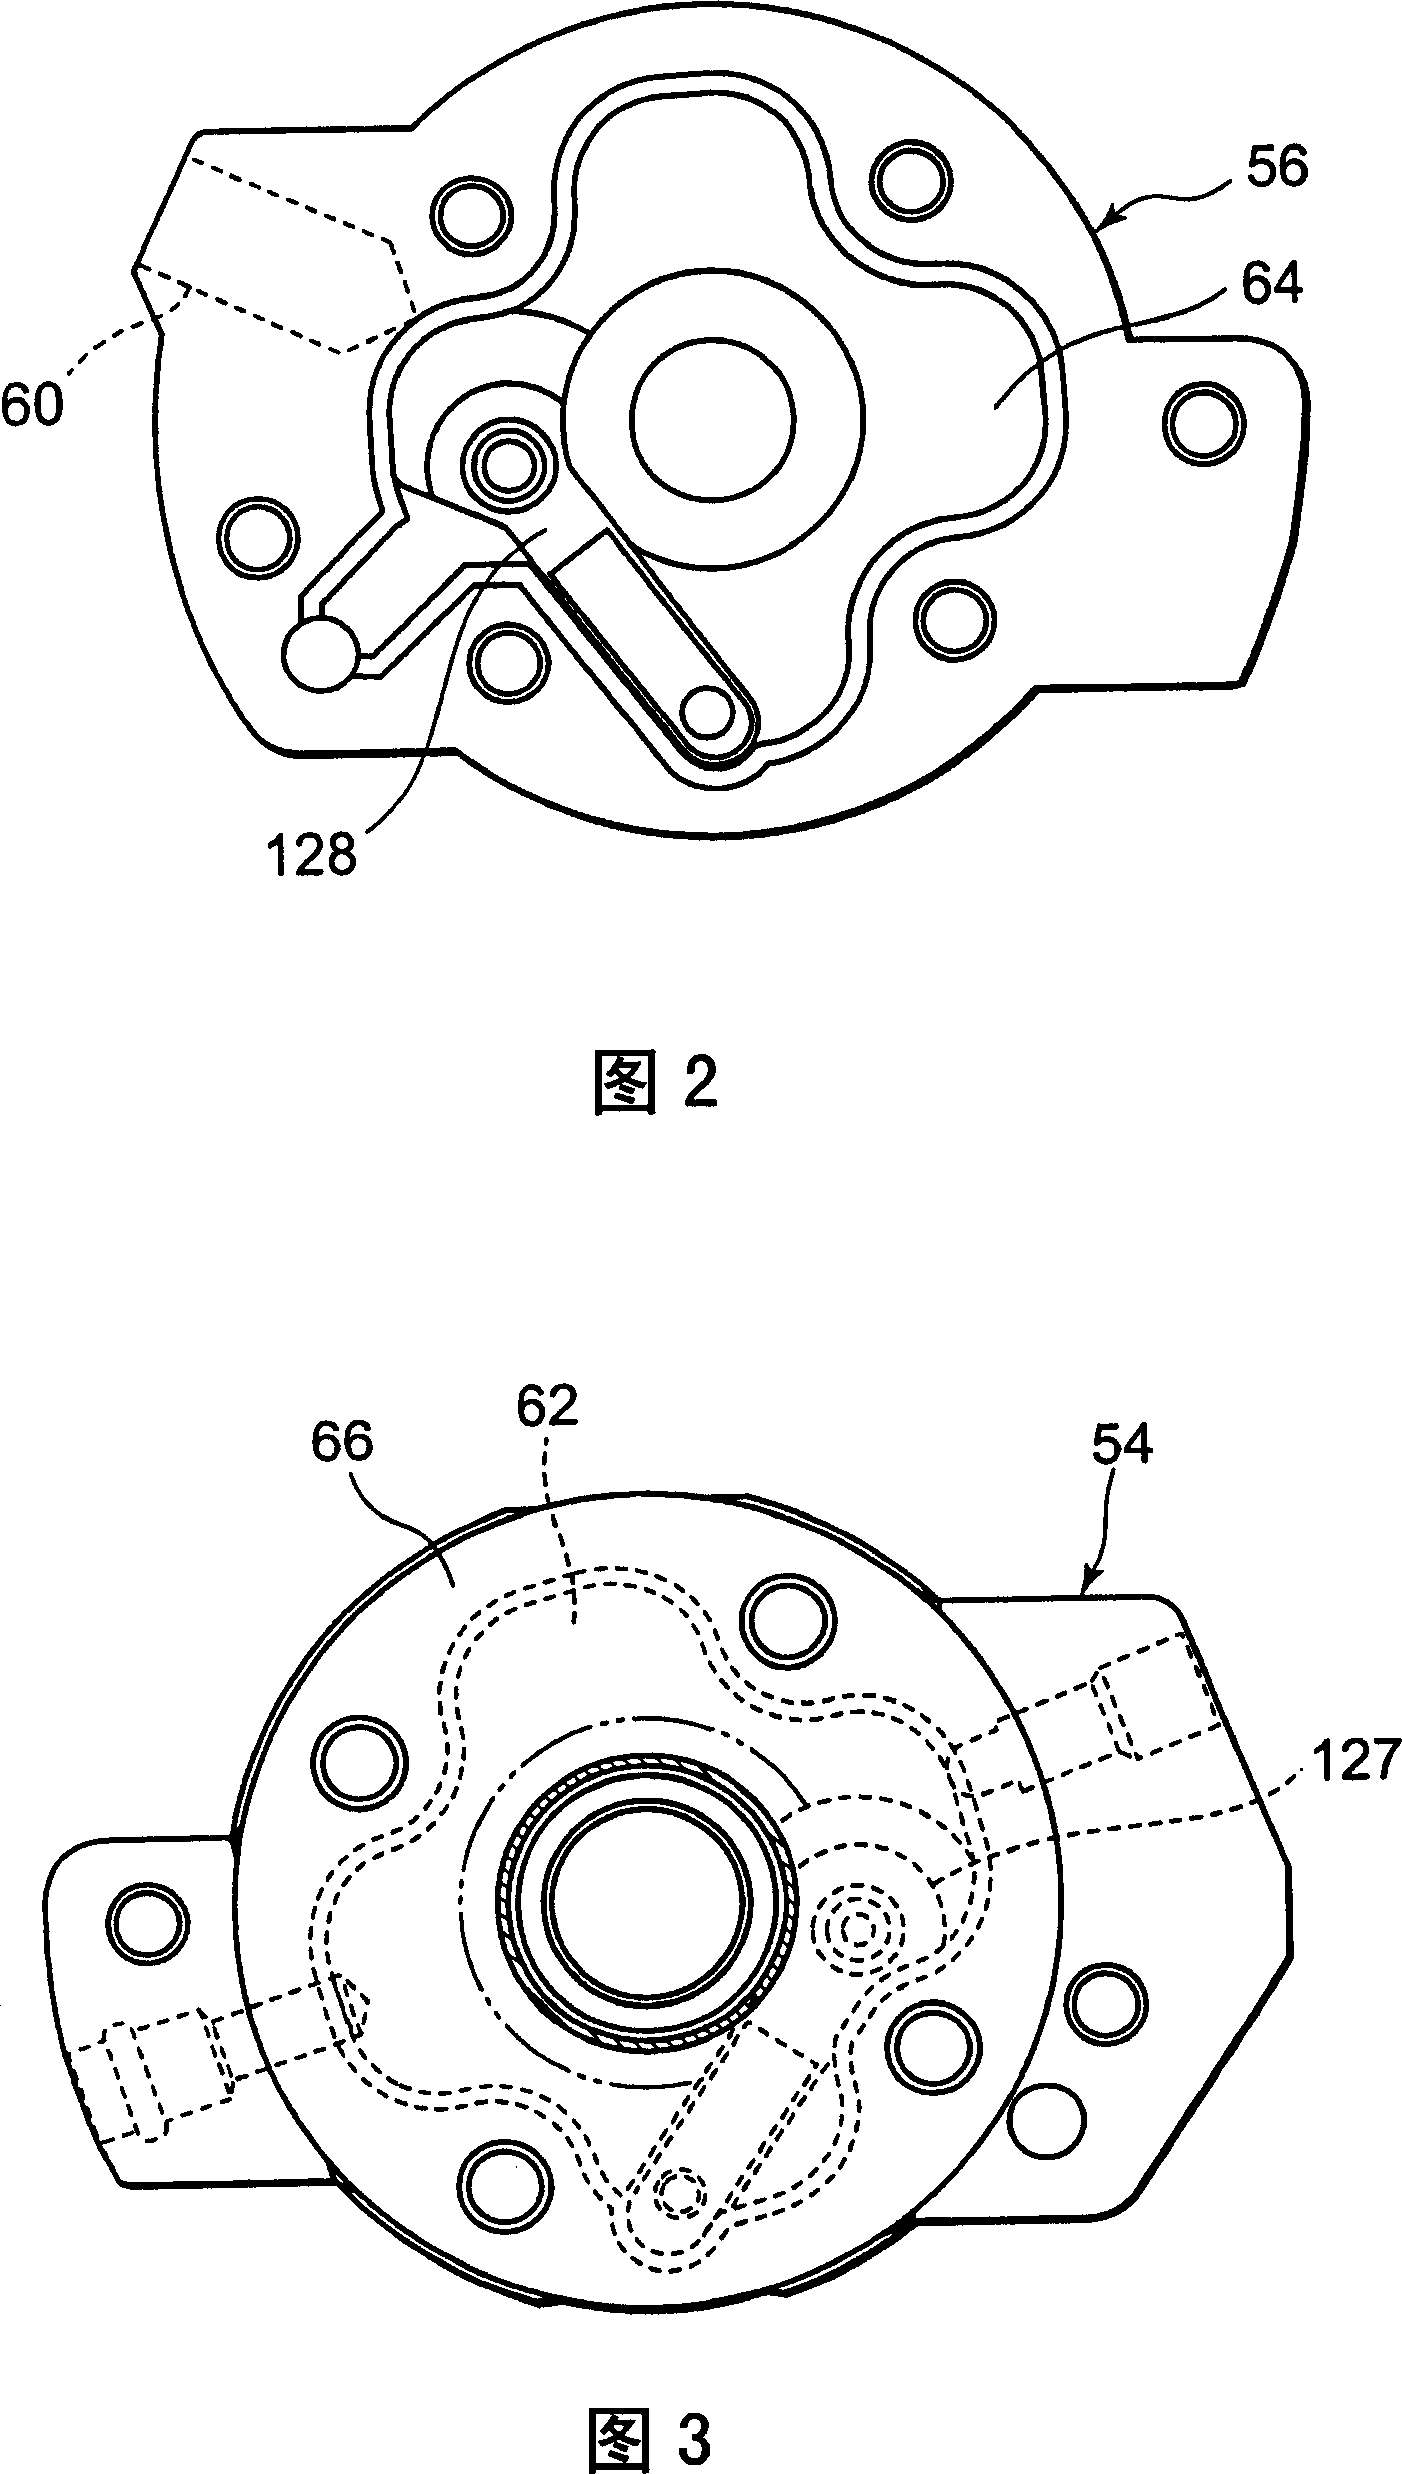 Multistage compression type rotary compressor